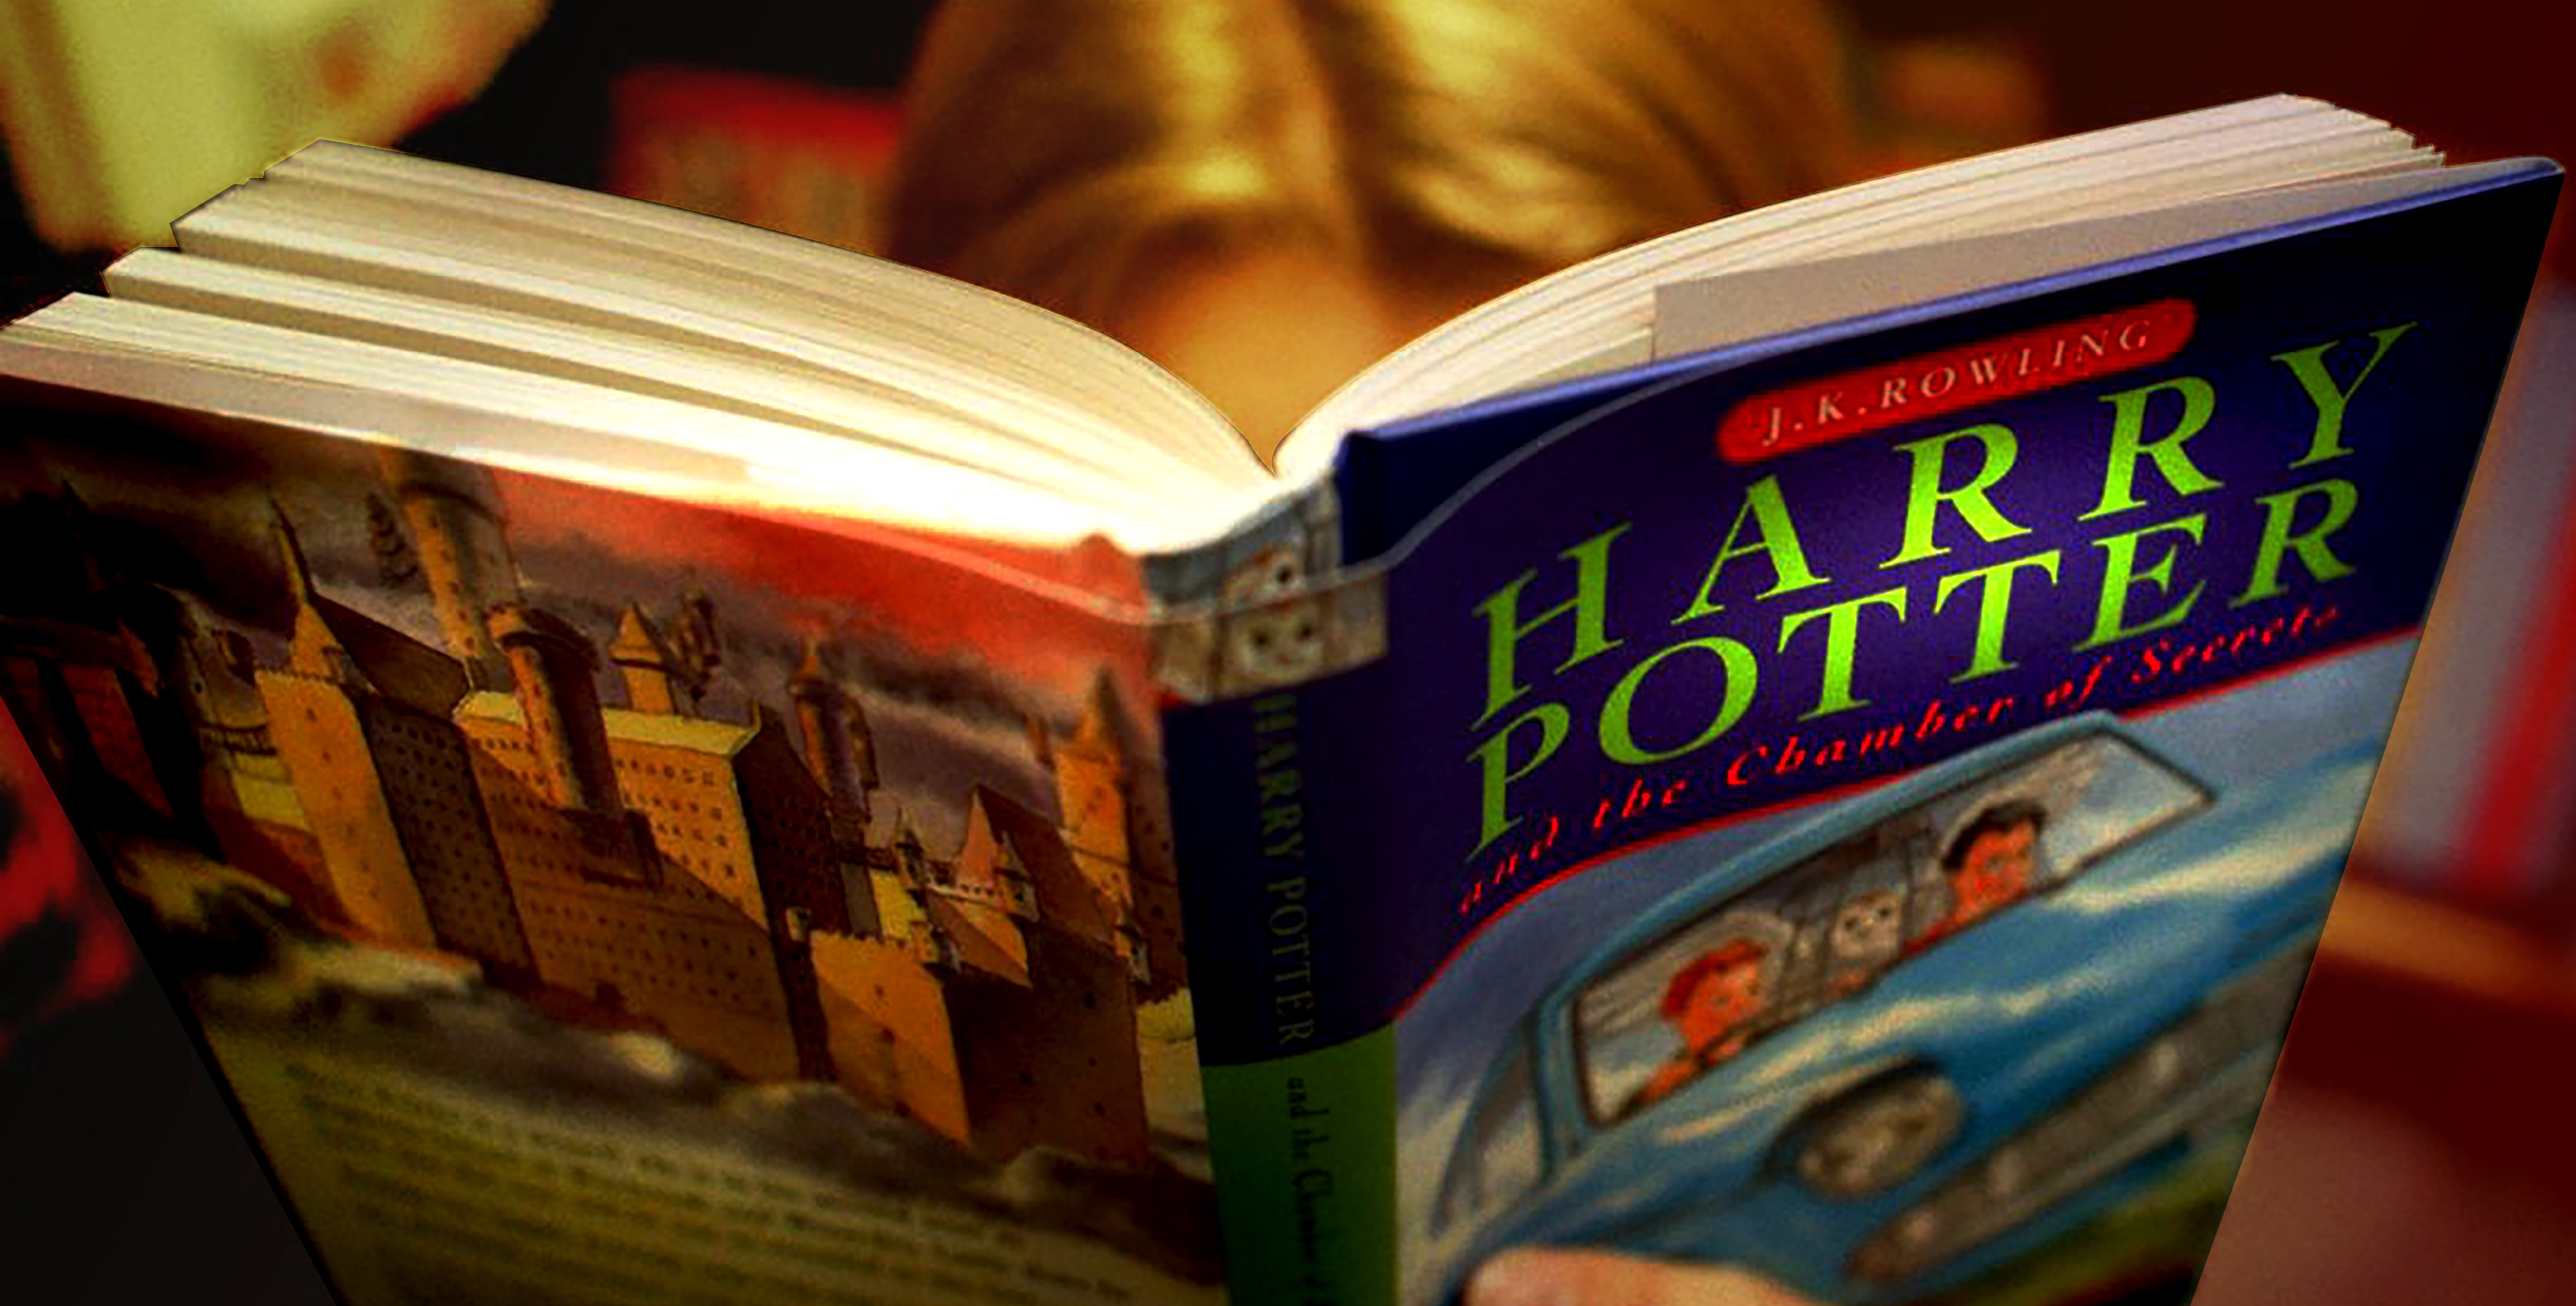 Down the Magic Lane | A glimpse of Harry Potter making one more child happy and excited!